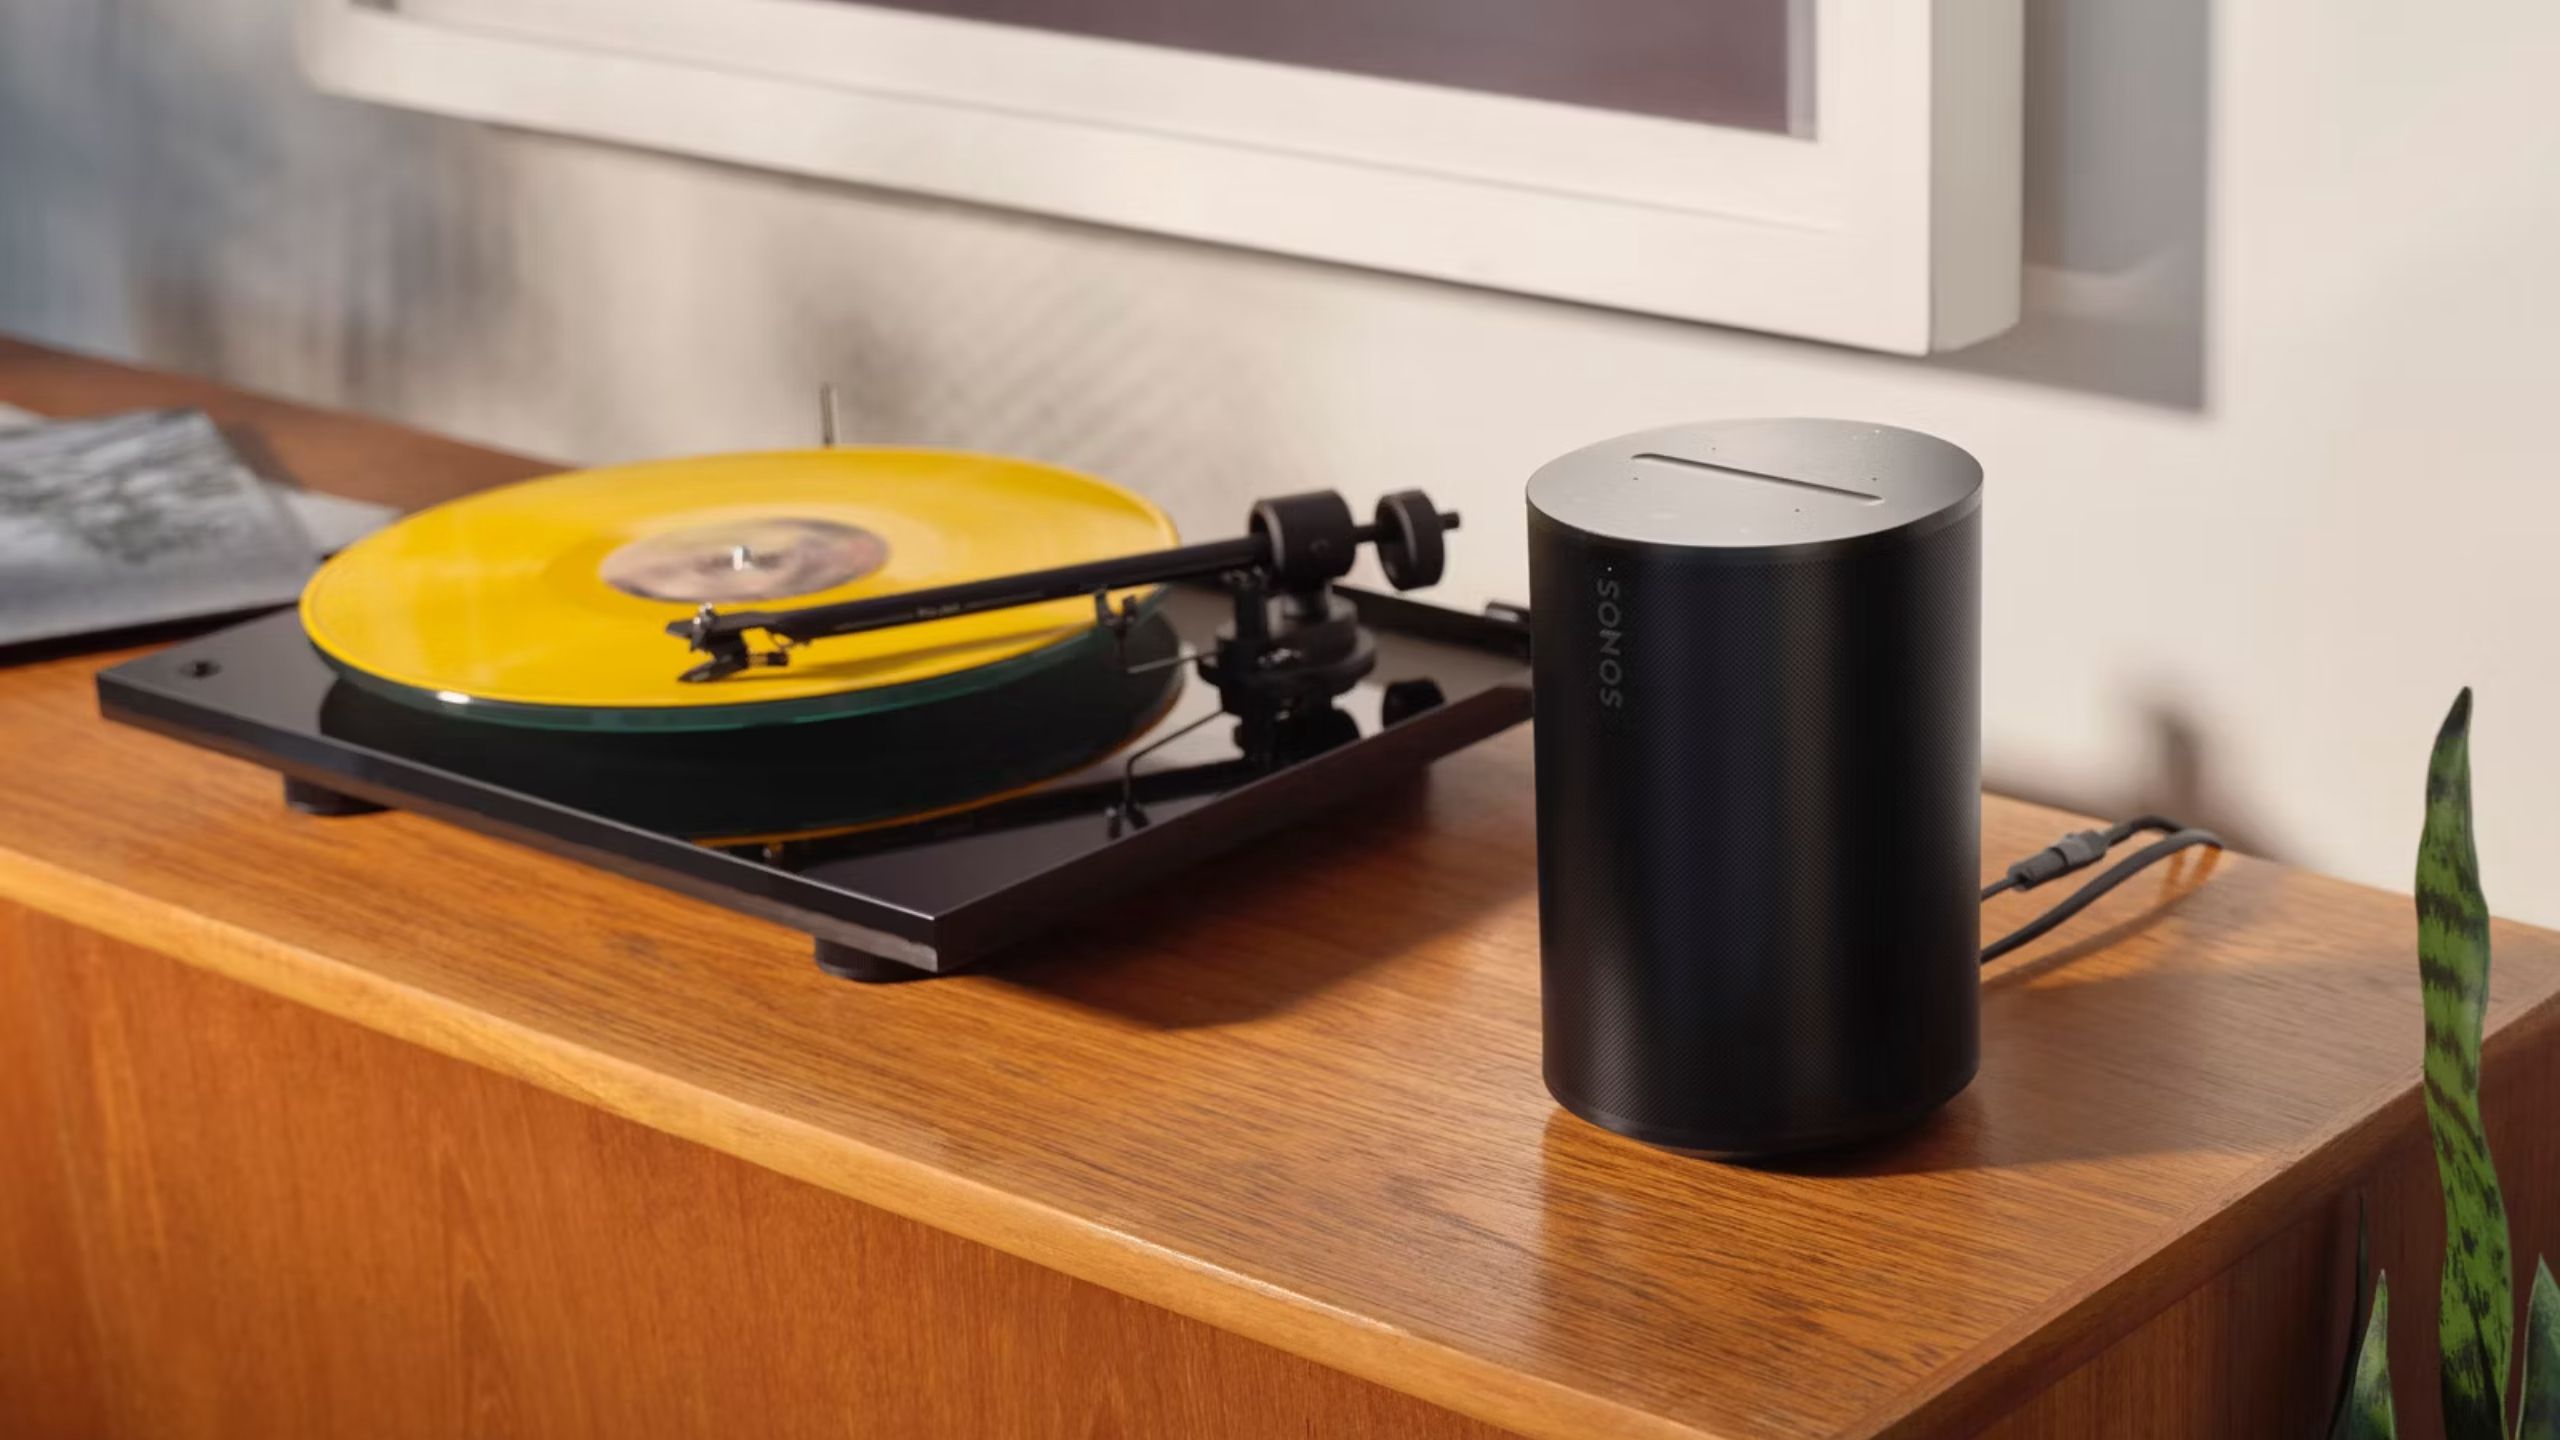 A record player attached to a Sonos Era 100 speaker.